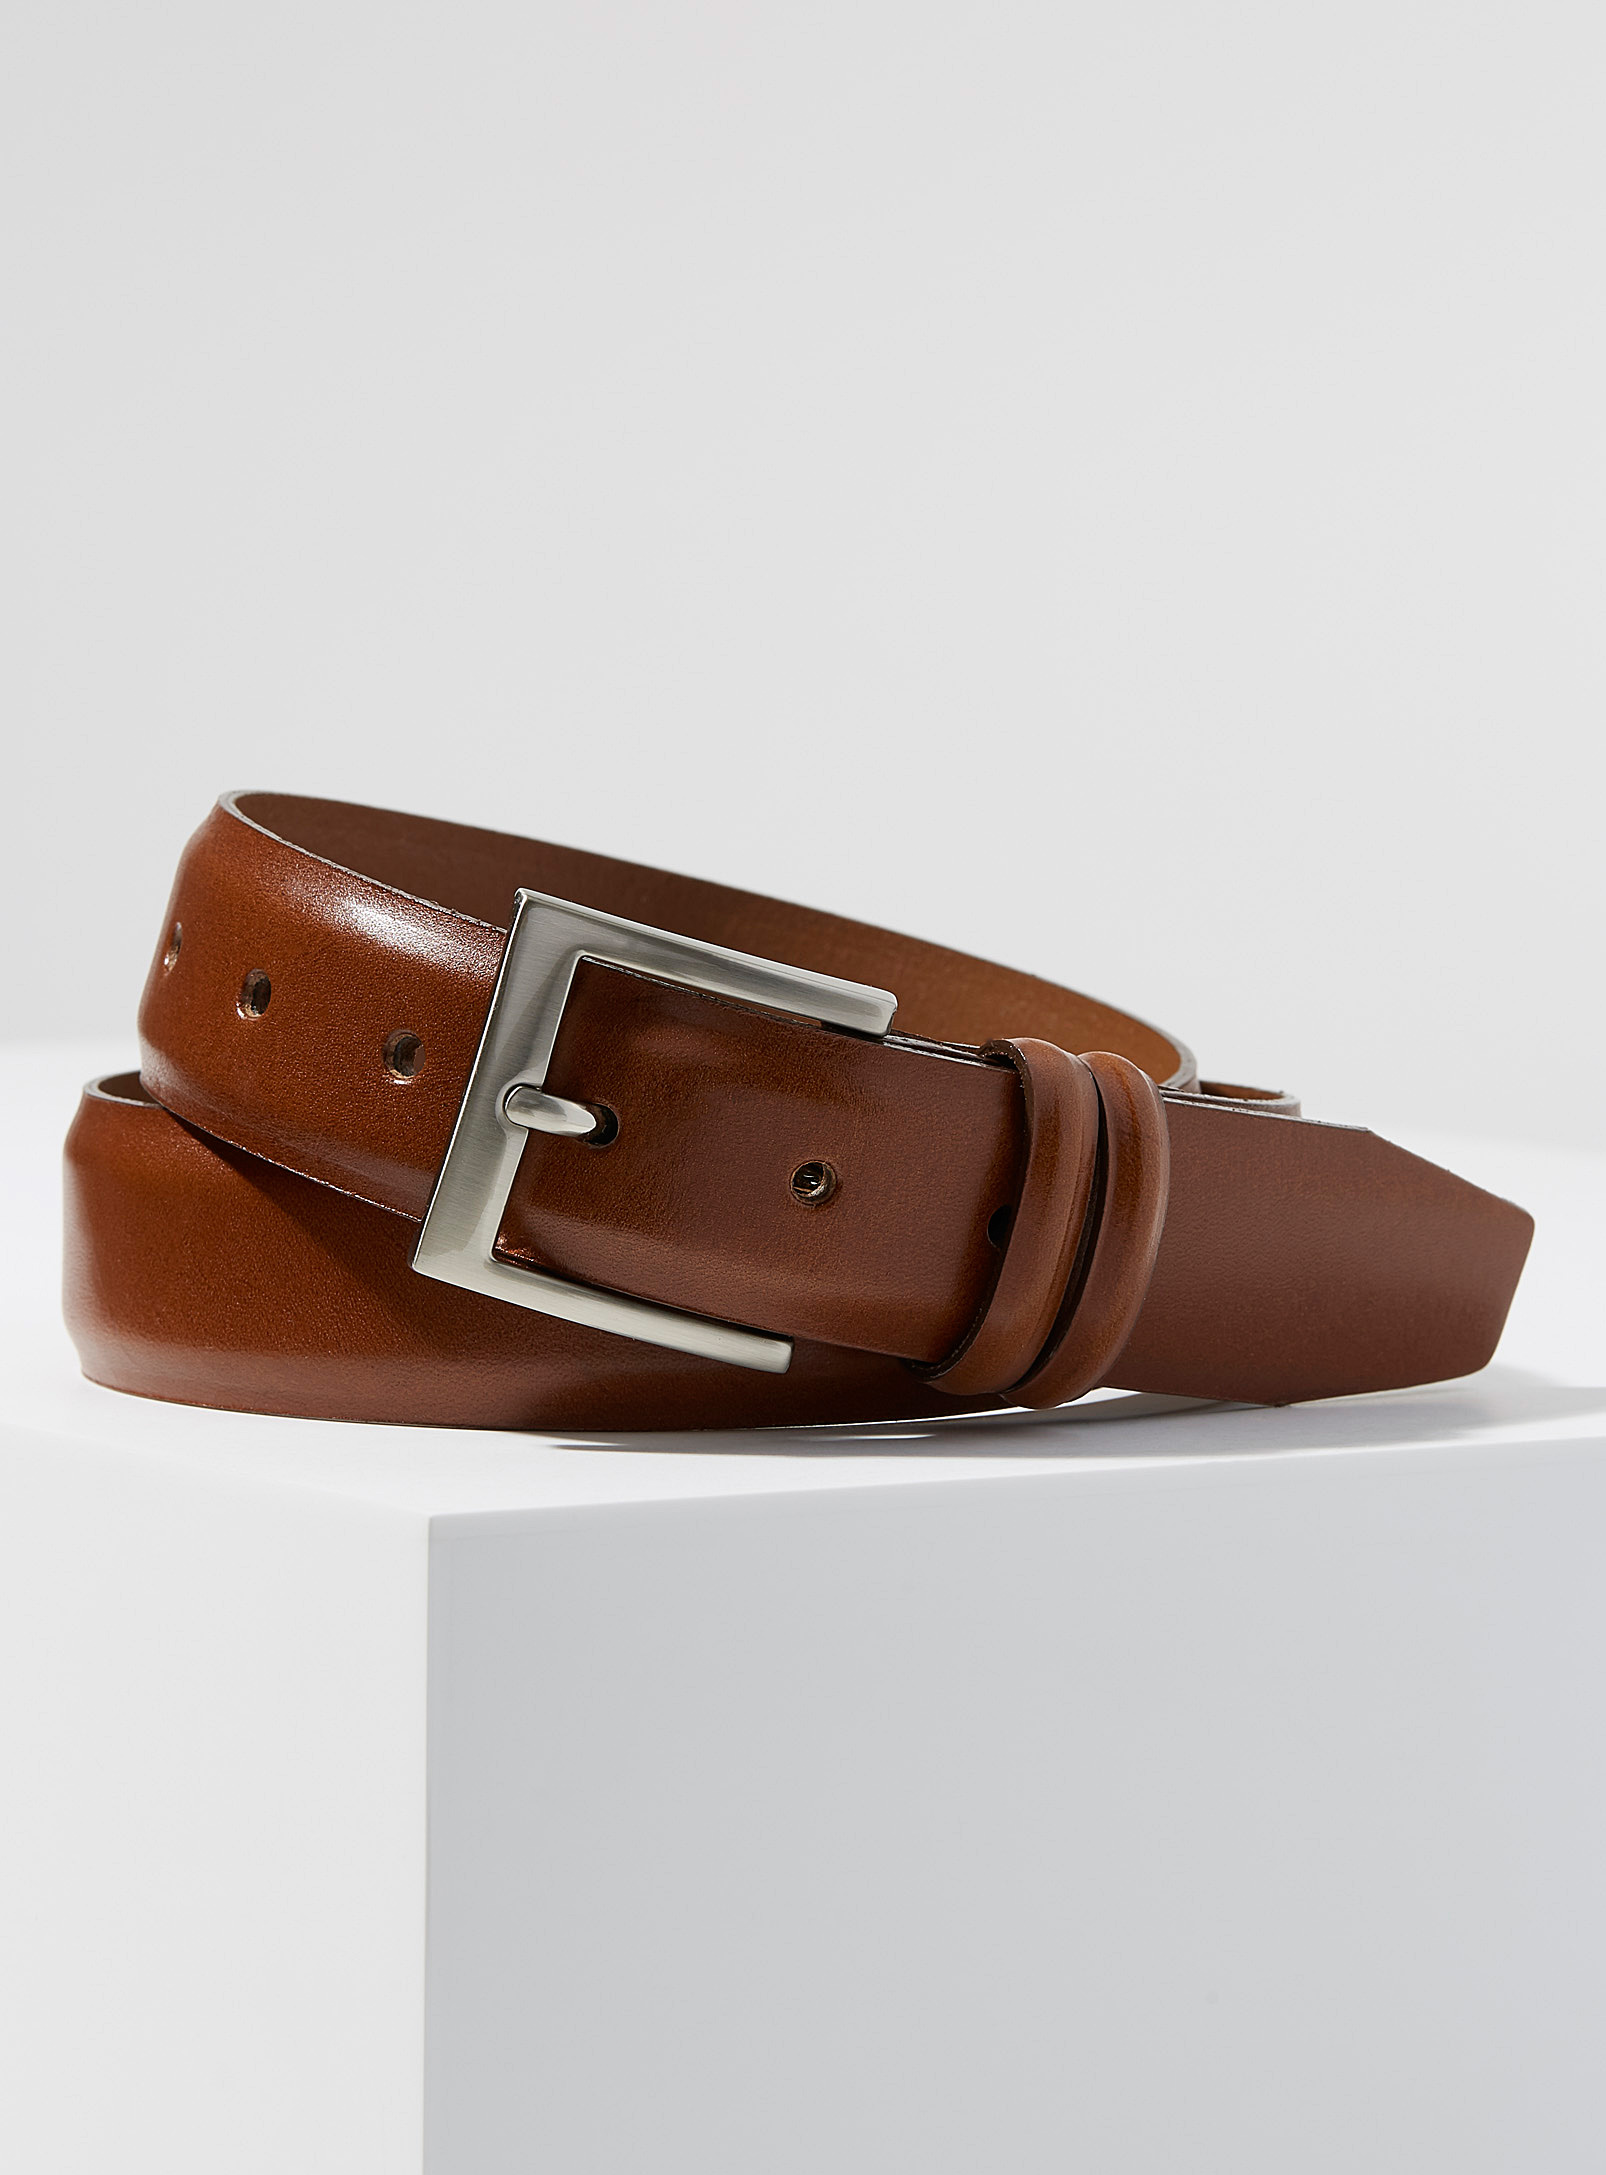 Le 31 Leather Dress Belt In Fawn